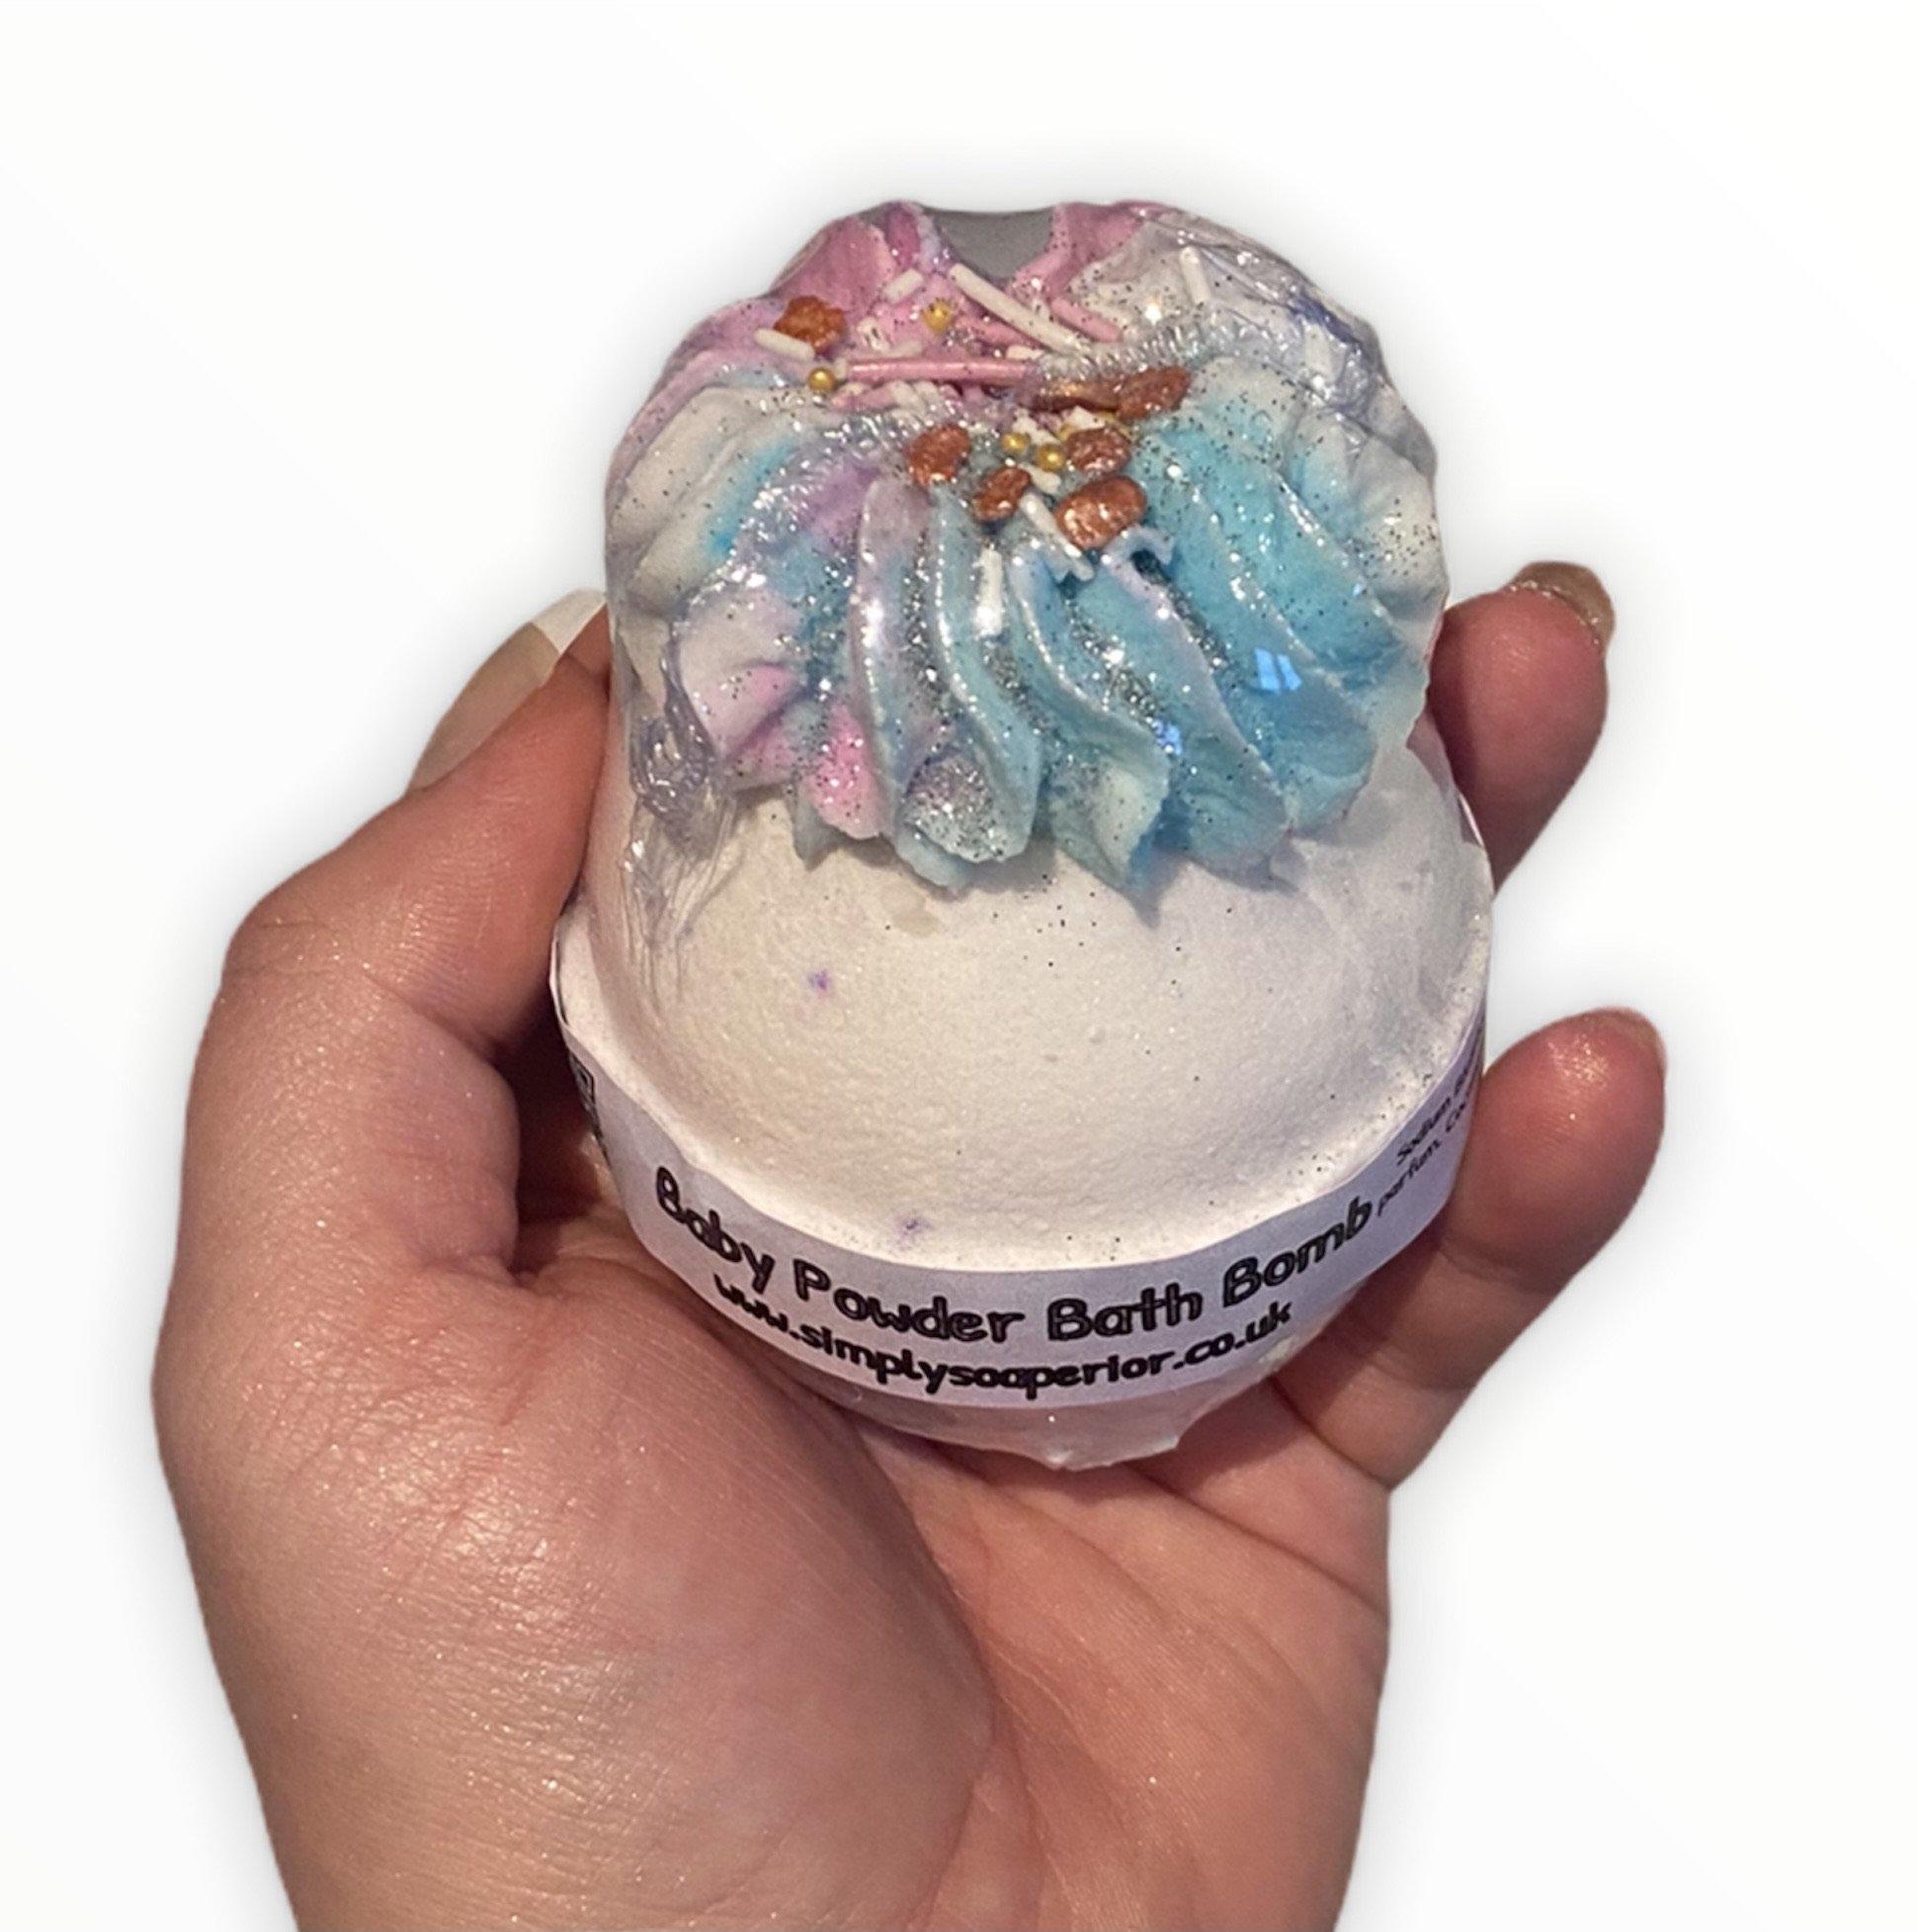 A  designer Baby Powder bath bomb encased with minimal shrink-wrap packing, displaying the label of the product.